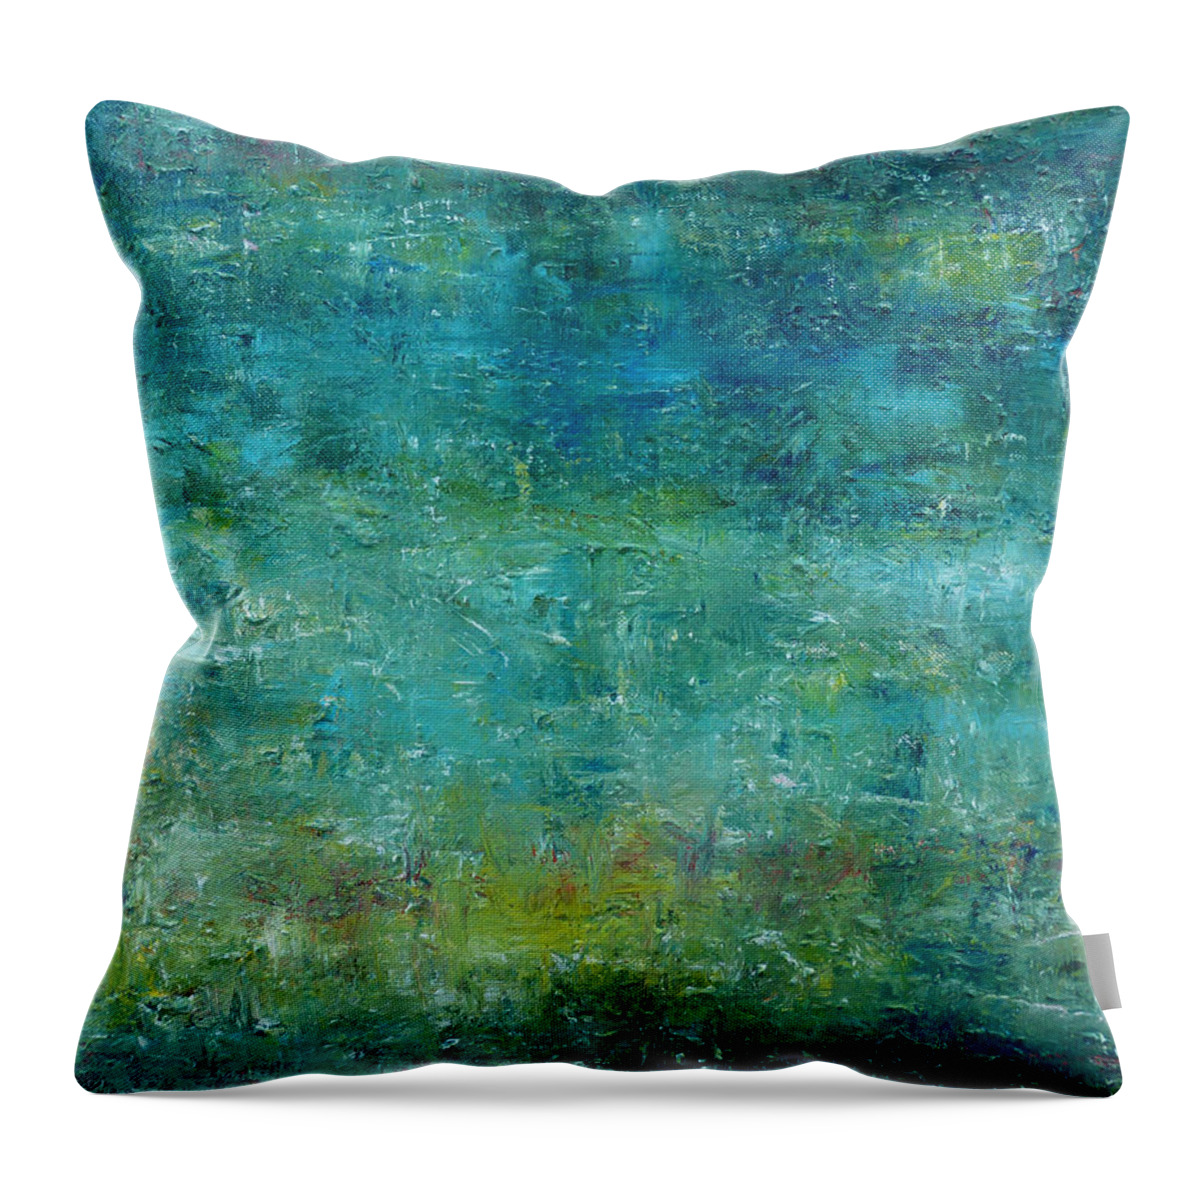 Abstract Throw Pillow featuring the painting Memories by Derek Kaplan